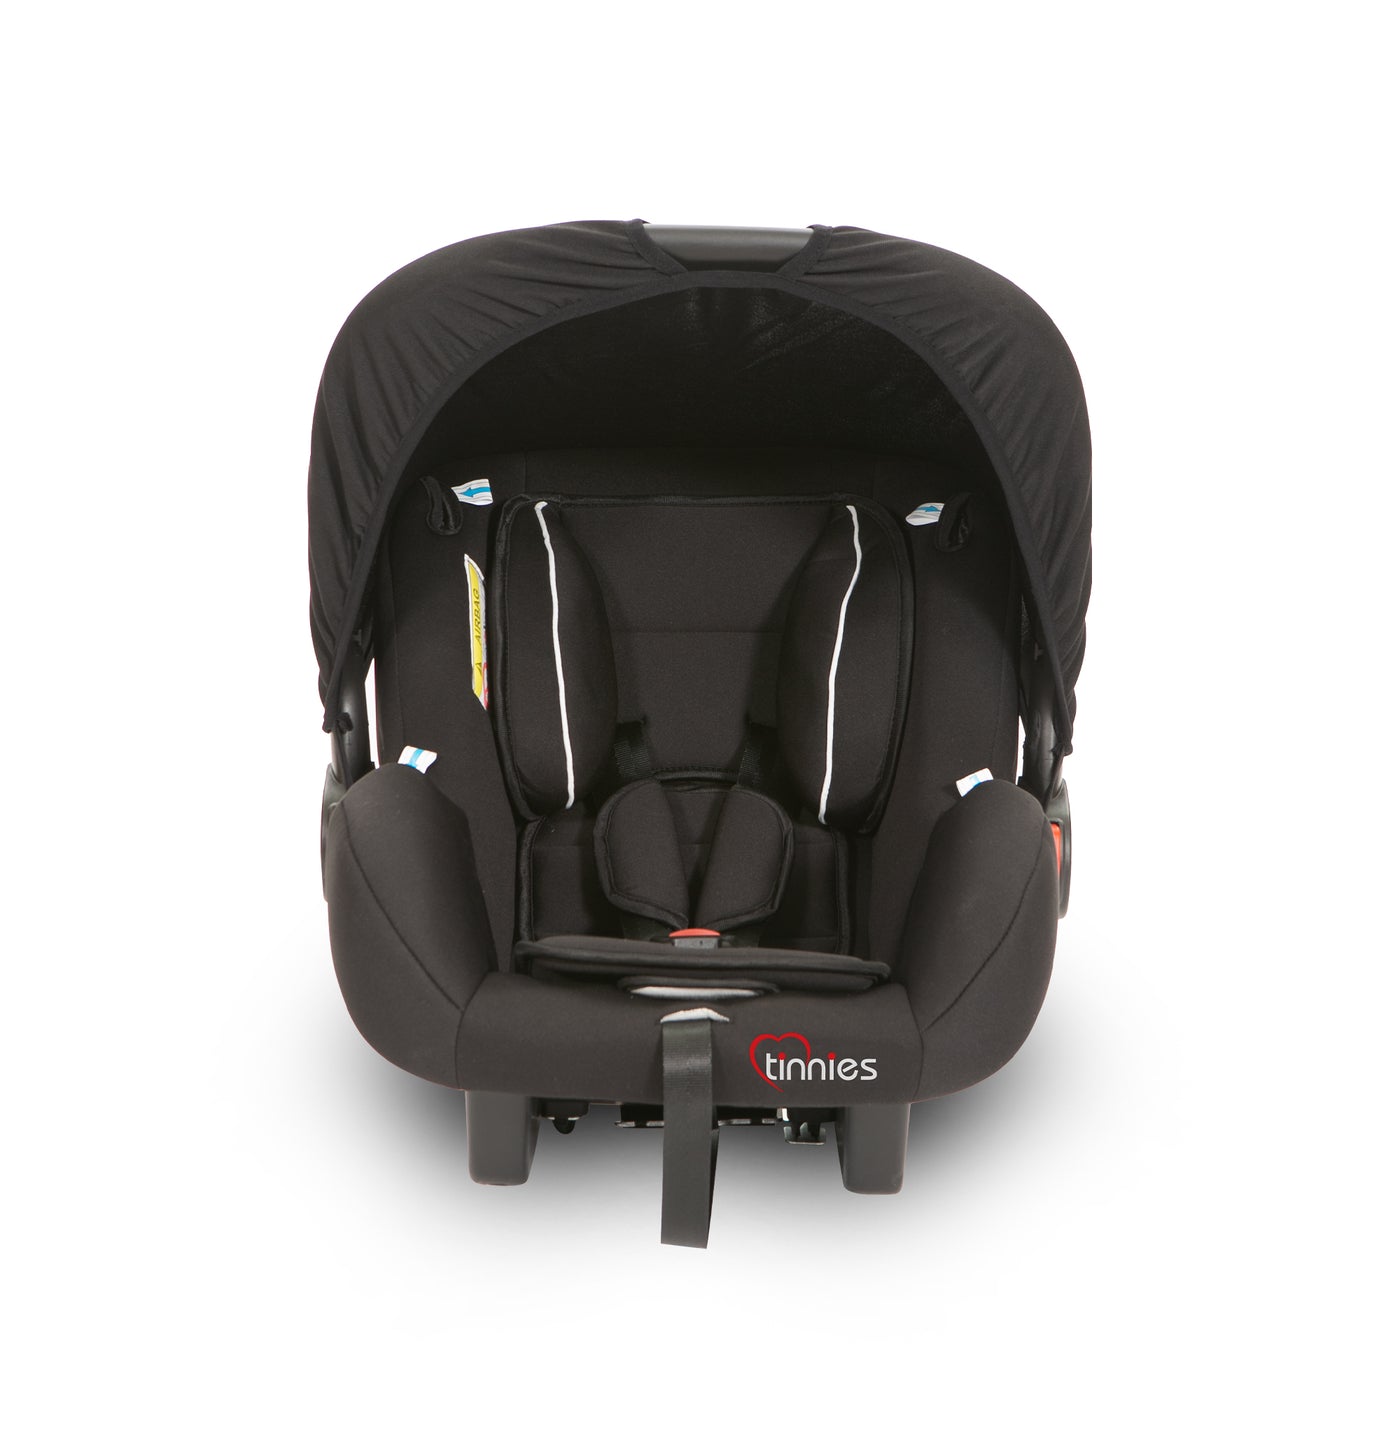 TINNIES BABY CARRY COT-BLACK T001